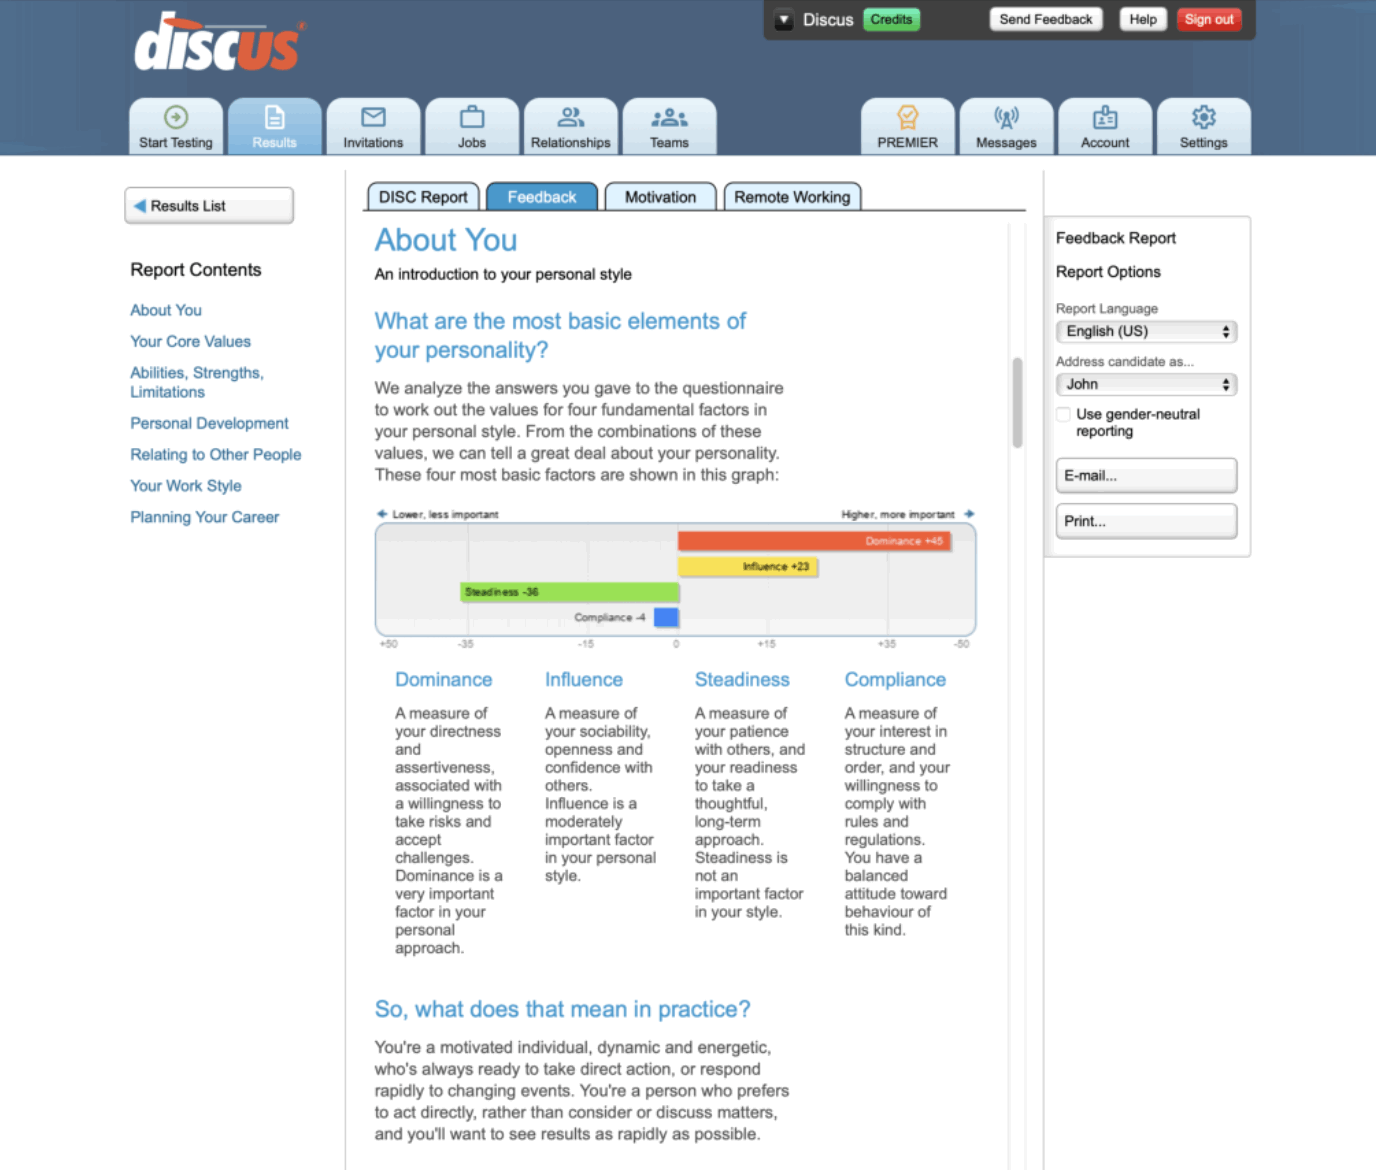 Screenshot showing a Discus Feedback Report viewed through a Web browser